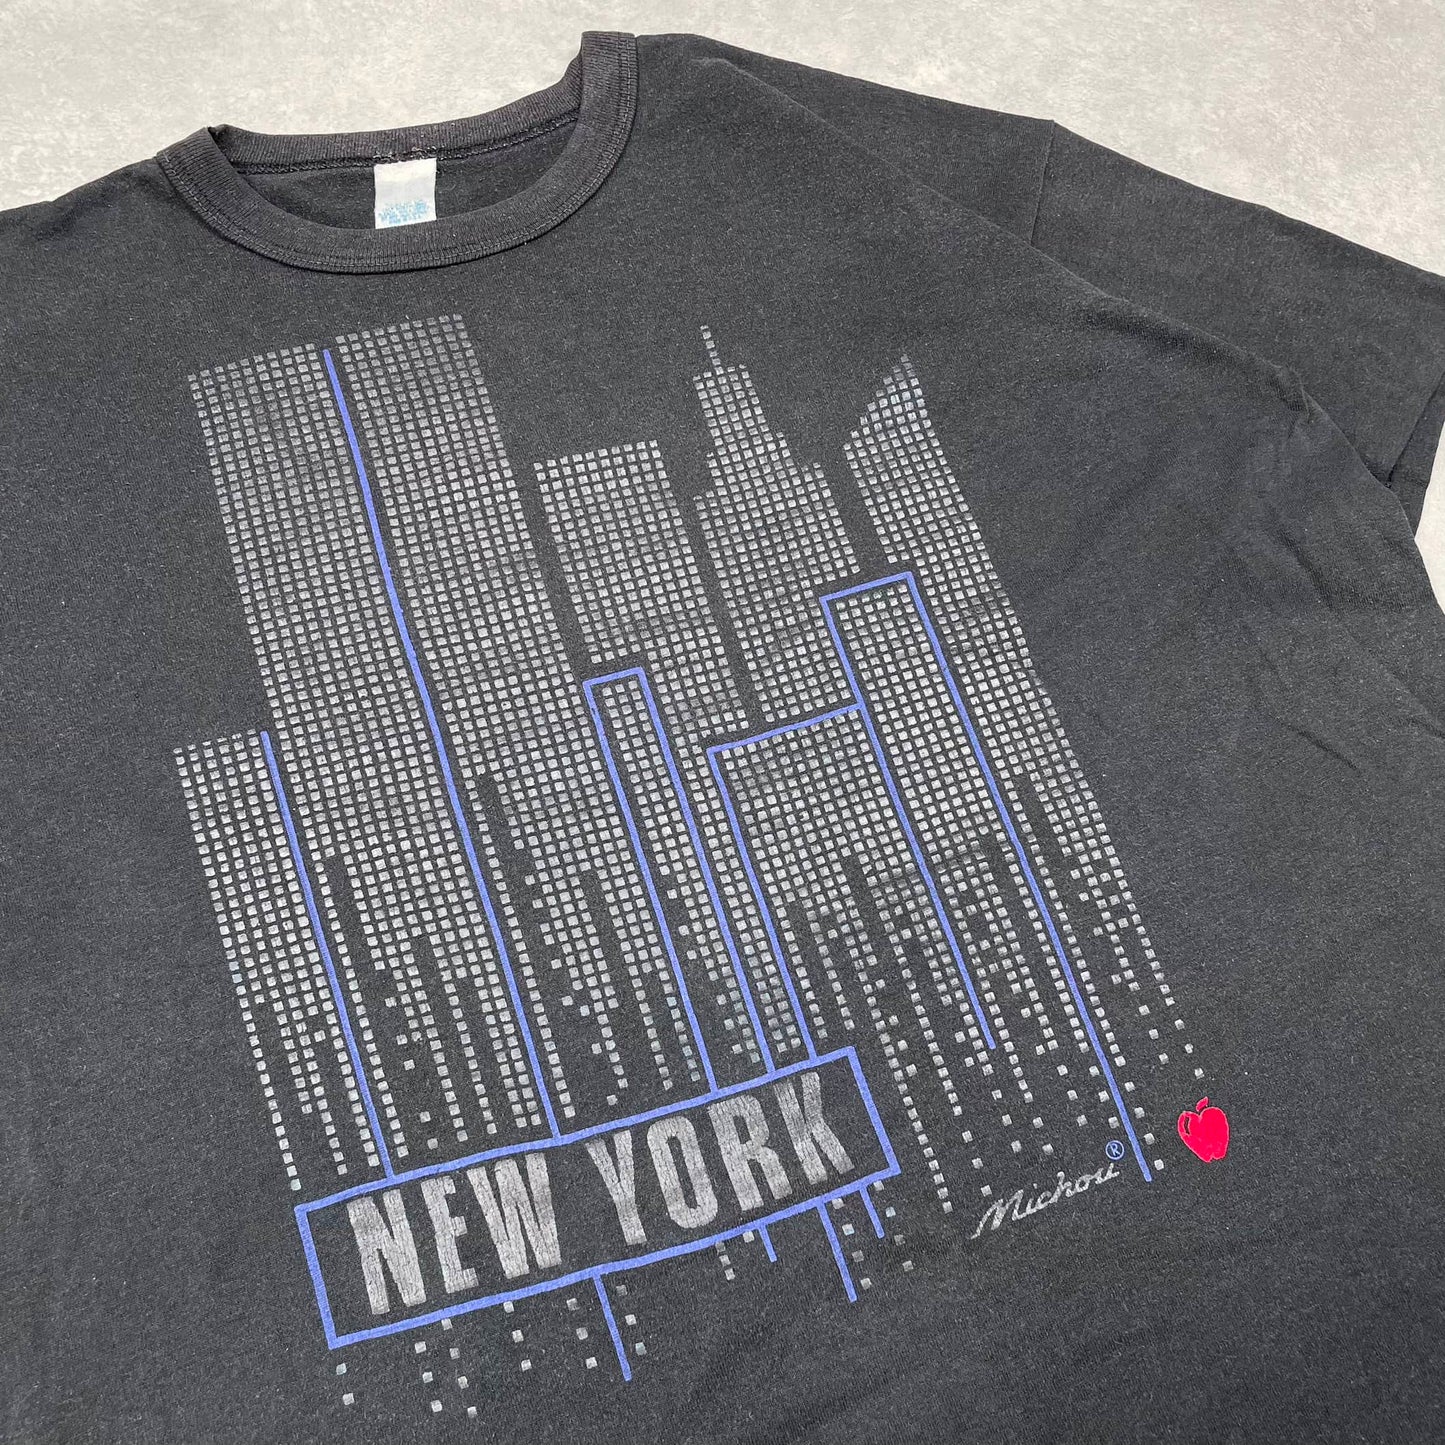 90's Vintage Single Stitch T-Shirt New York by Michou Made in USA